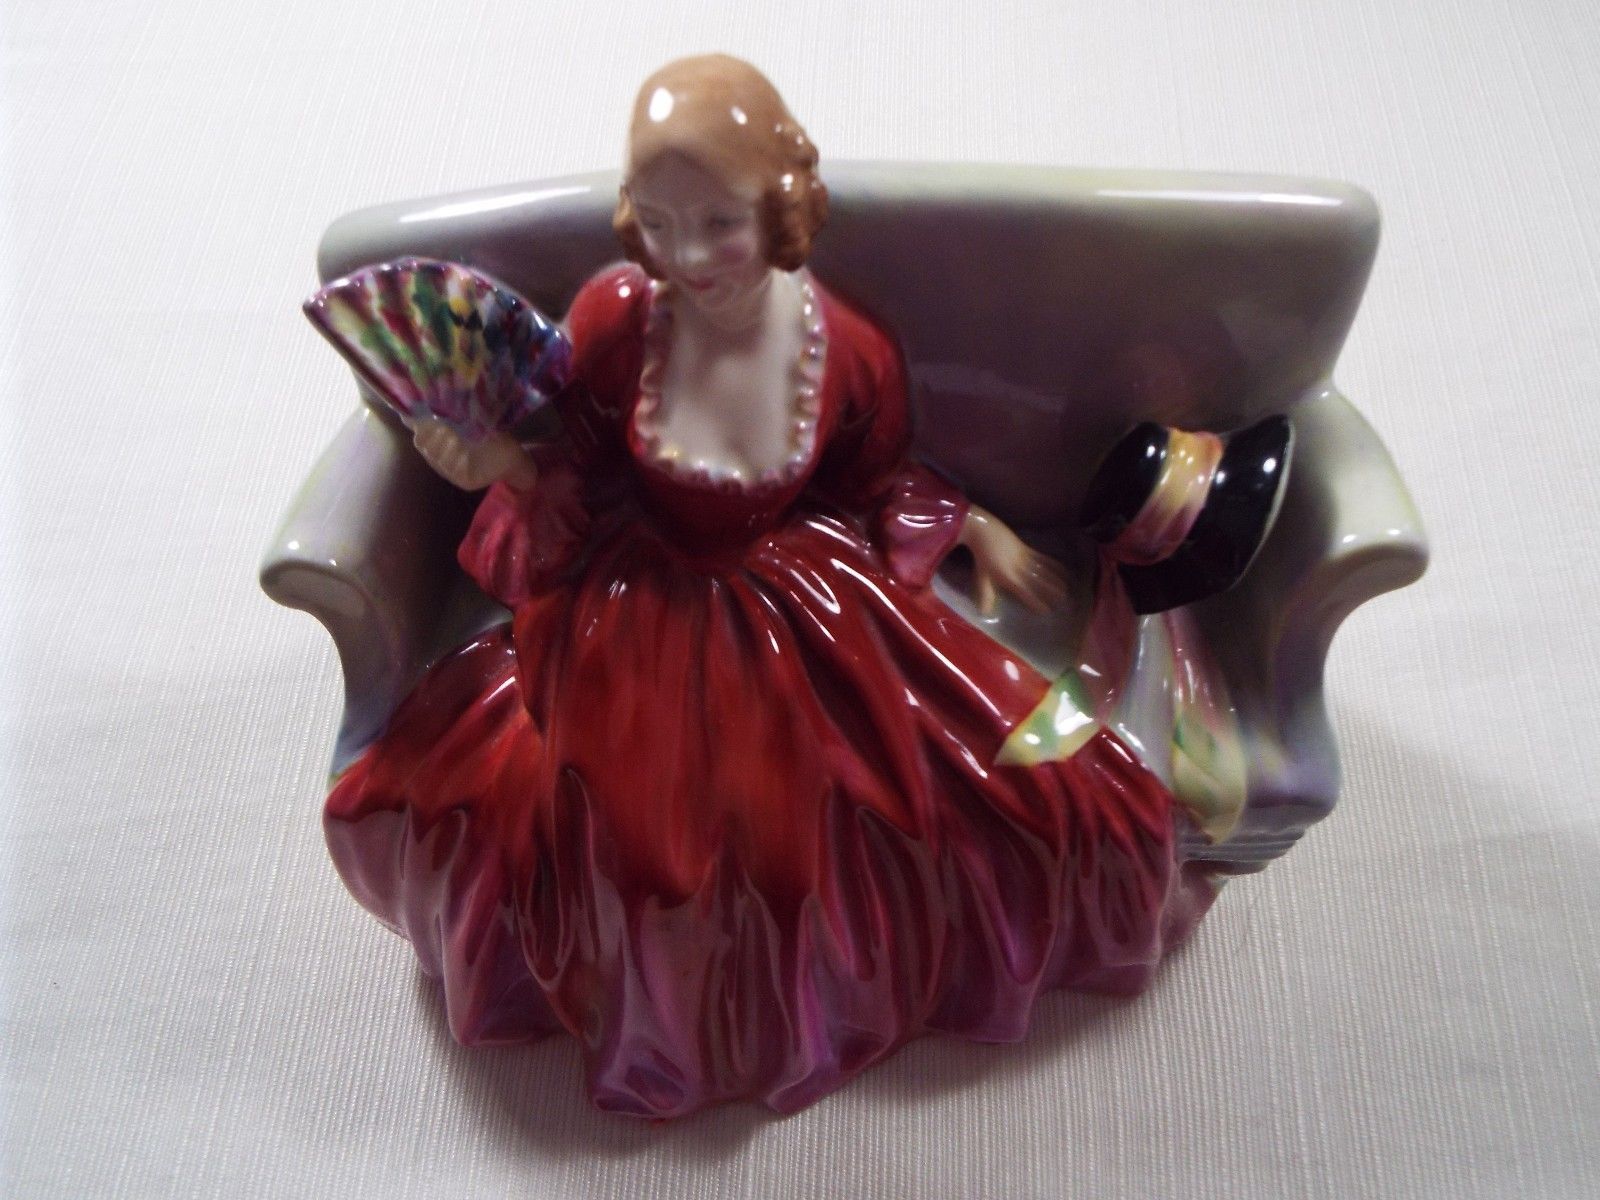 7 by 6 Royal Doulton Figurine The Old Balloon Seller H.N.1315 1970s